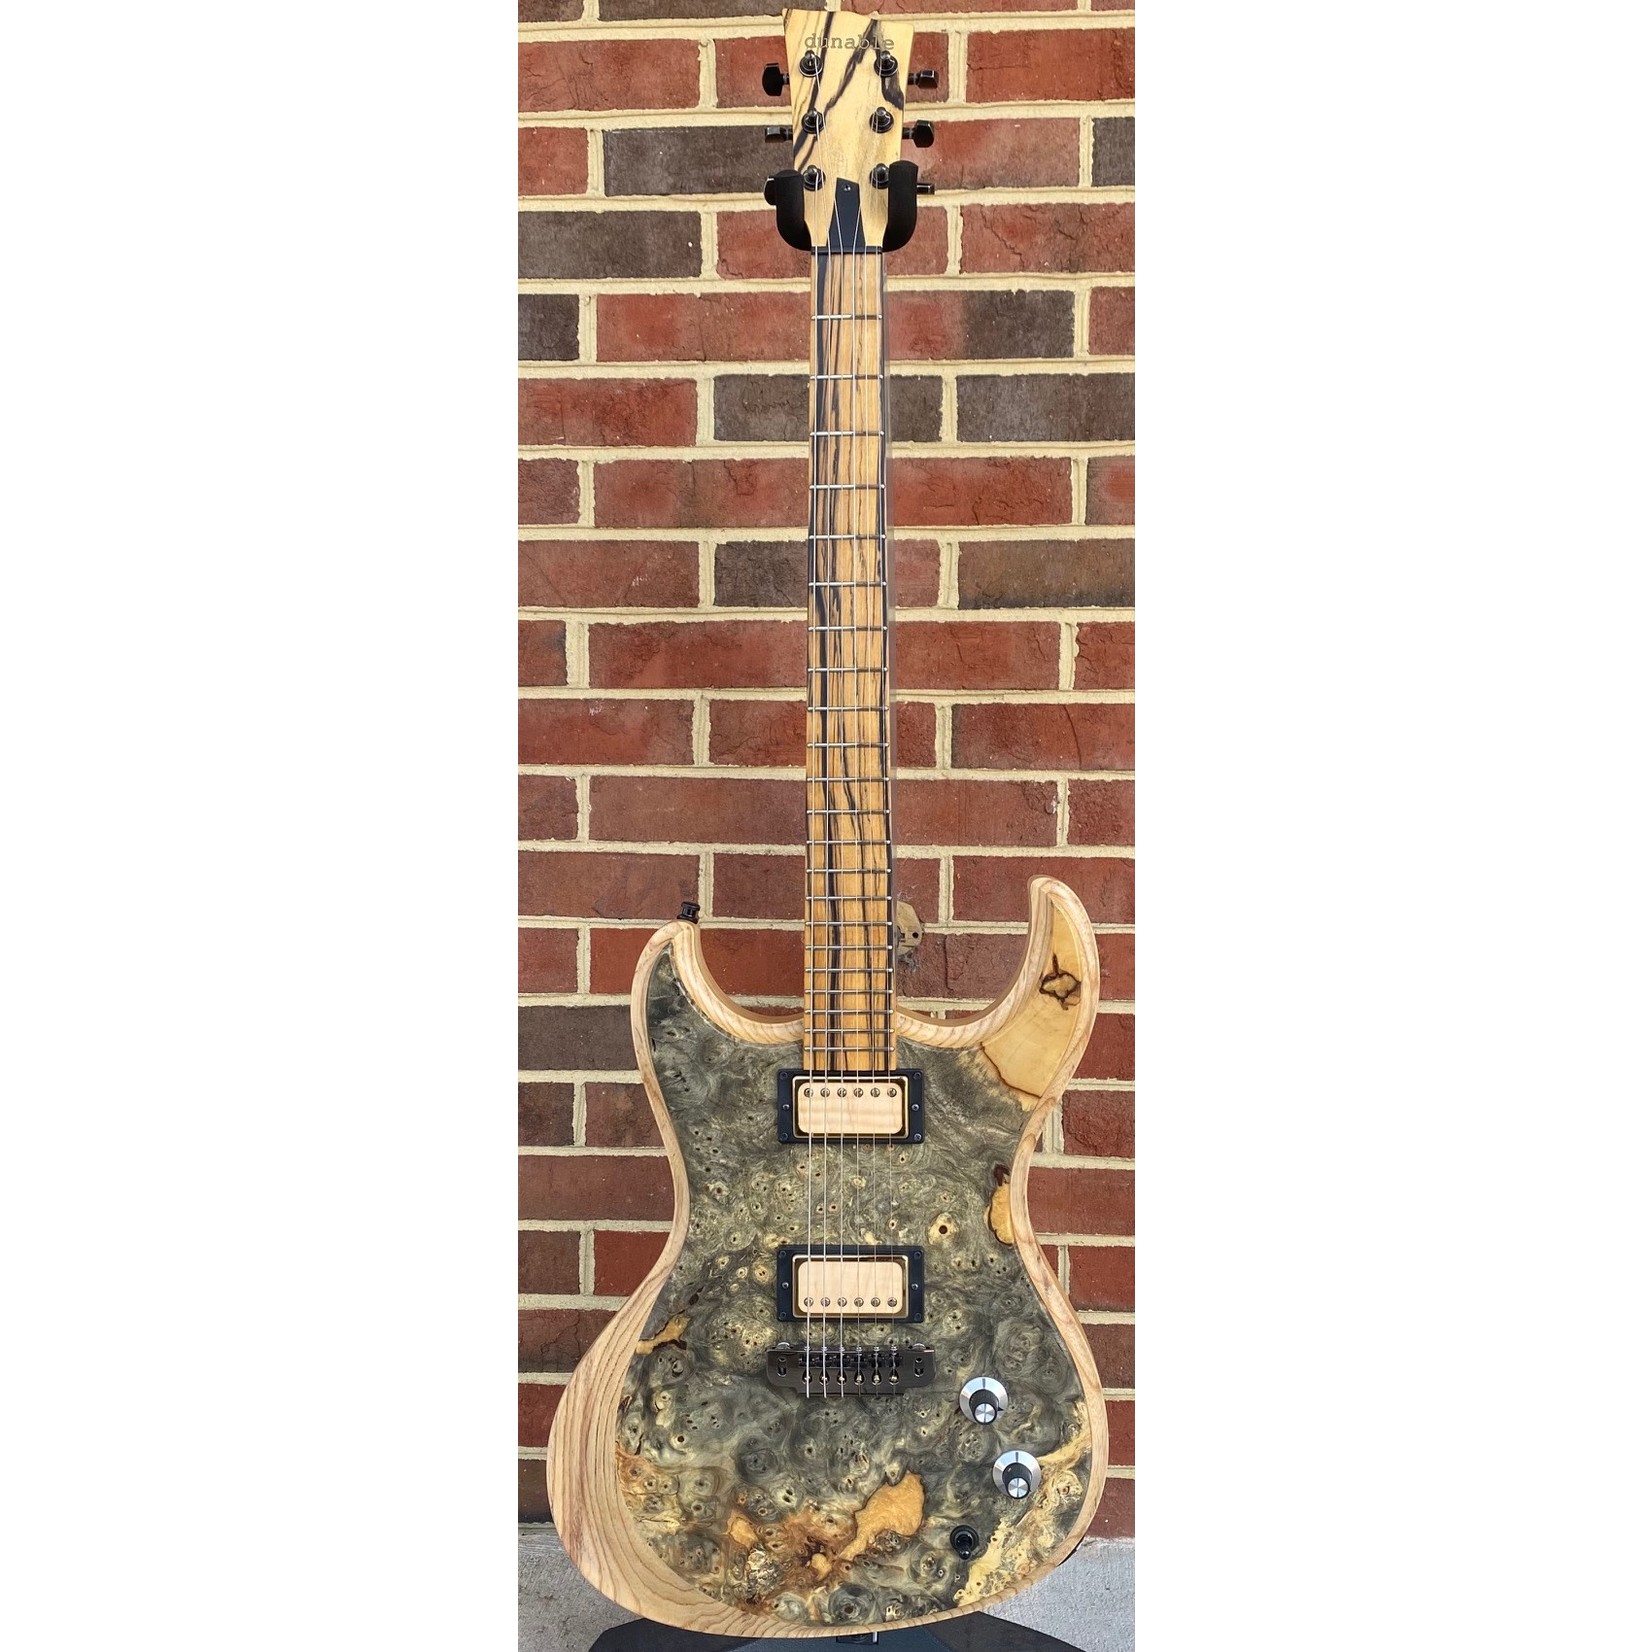 Dunable Guitars Dunable Guitars USA Special Stash #1 - Gnarwhal, One Piece Buckeye Burl Top w/ Gold Sparkle Resin Fill, Swamp Ash Body, Pale Moon Ebony Neck, Pale Moon Ebony Fretboard, Hardshell Case